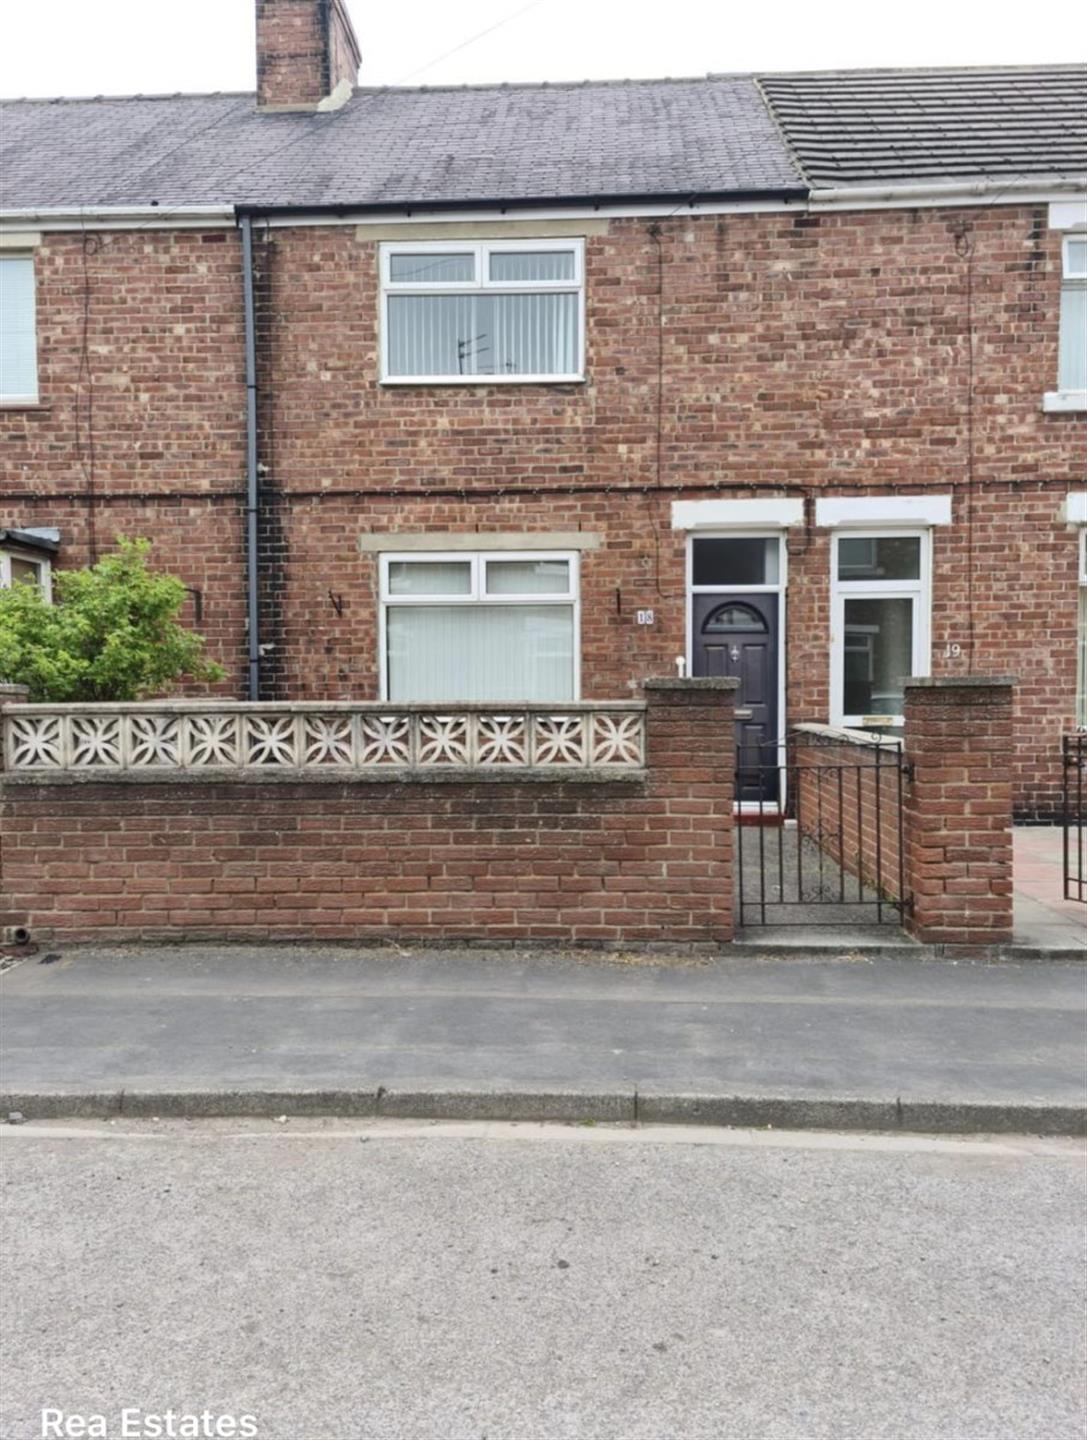 2 bedroom terraced house To Let in Saint Helens - photograph 1.